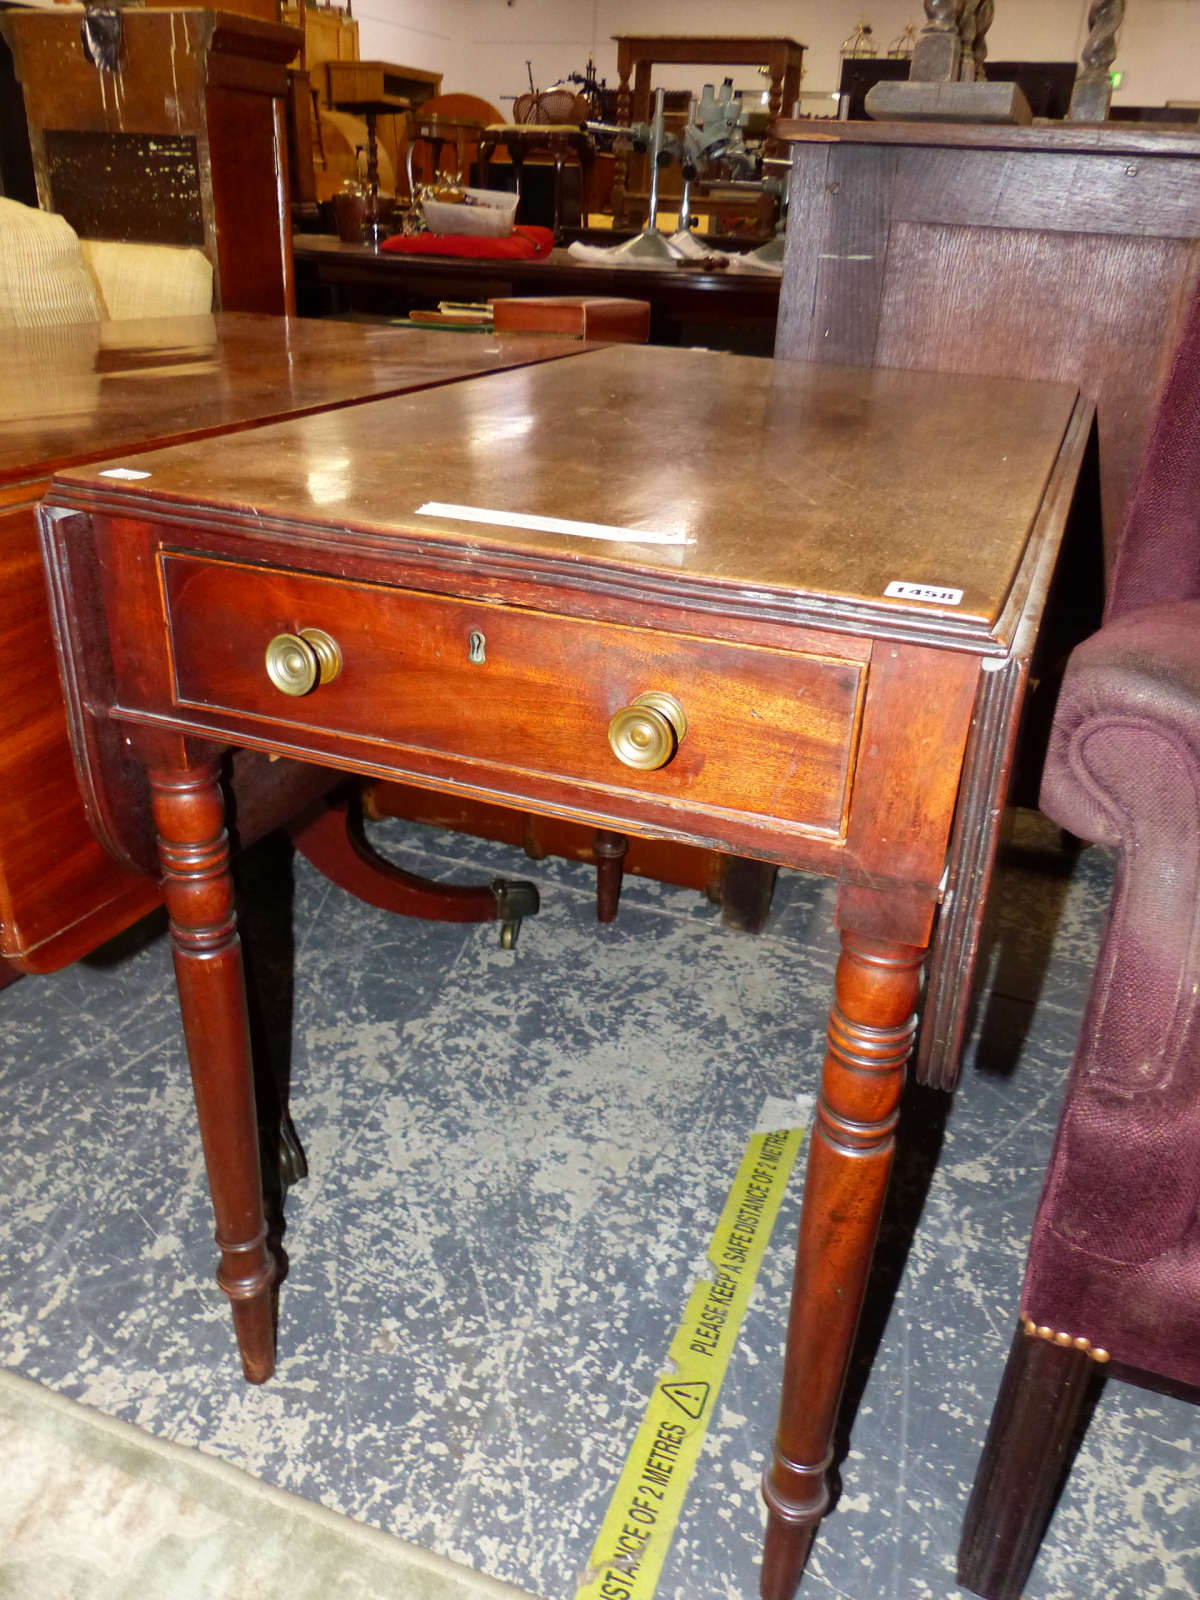 AN EARLY 19TH C. MAHOGANY PEMBROKE TABLE WITH END DRAWER. W 106 X D 87 X H 74CMS. - Image 2 of 2